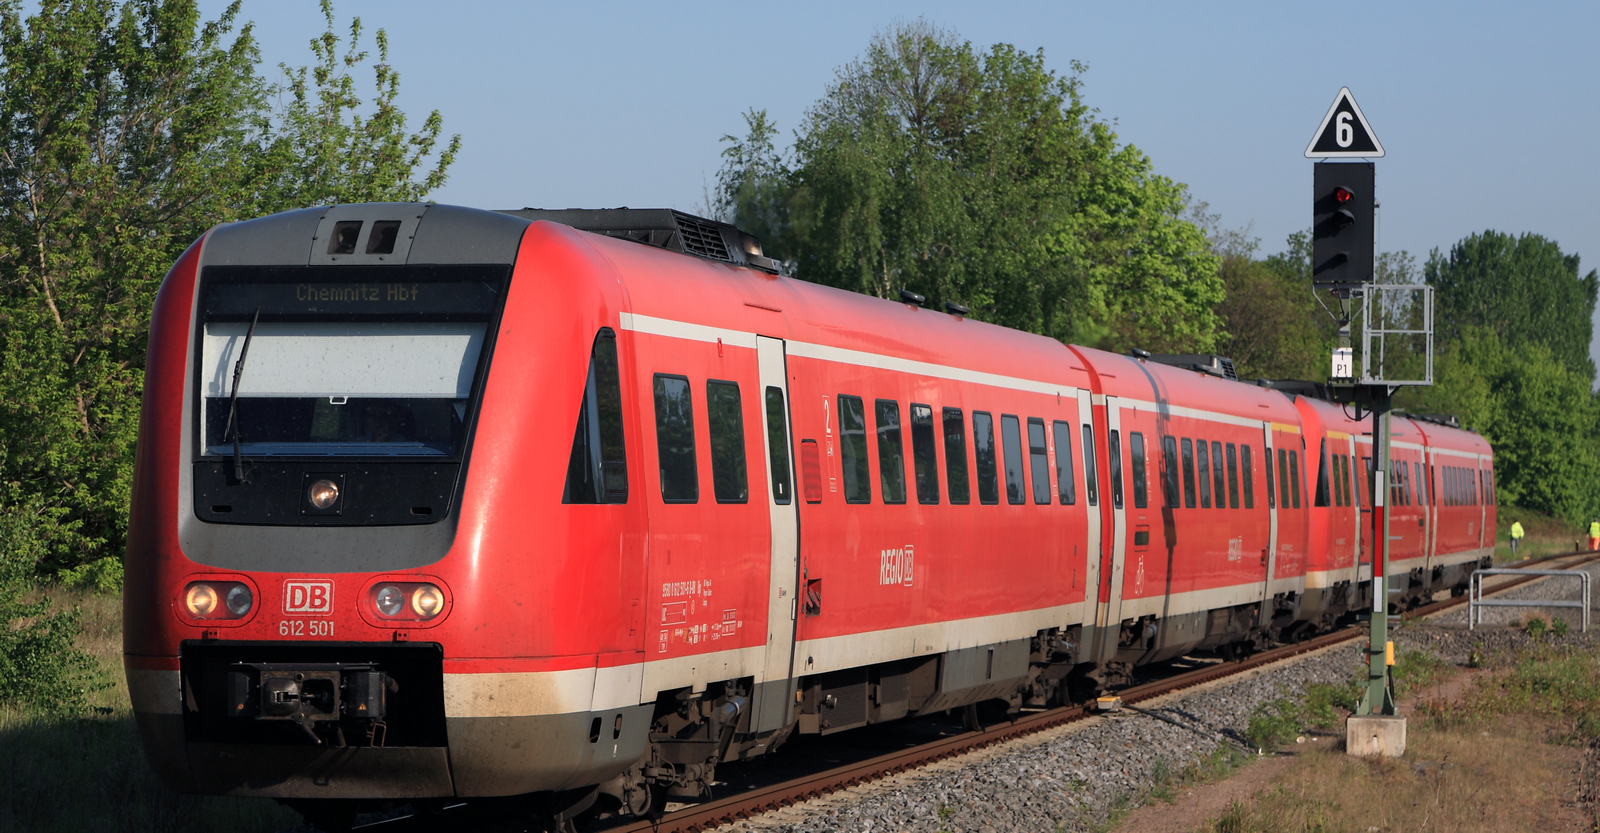 612 501 in multiple with a second unit in May 2012 in Liebertwolkwitz